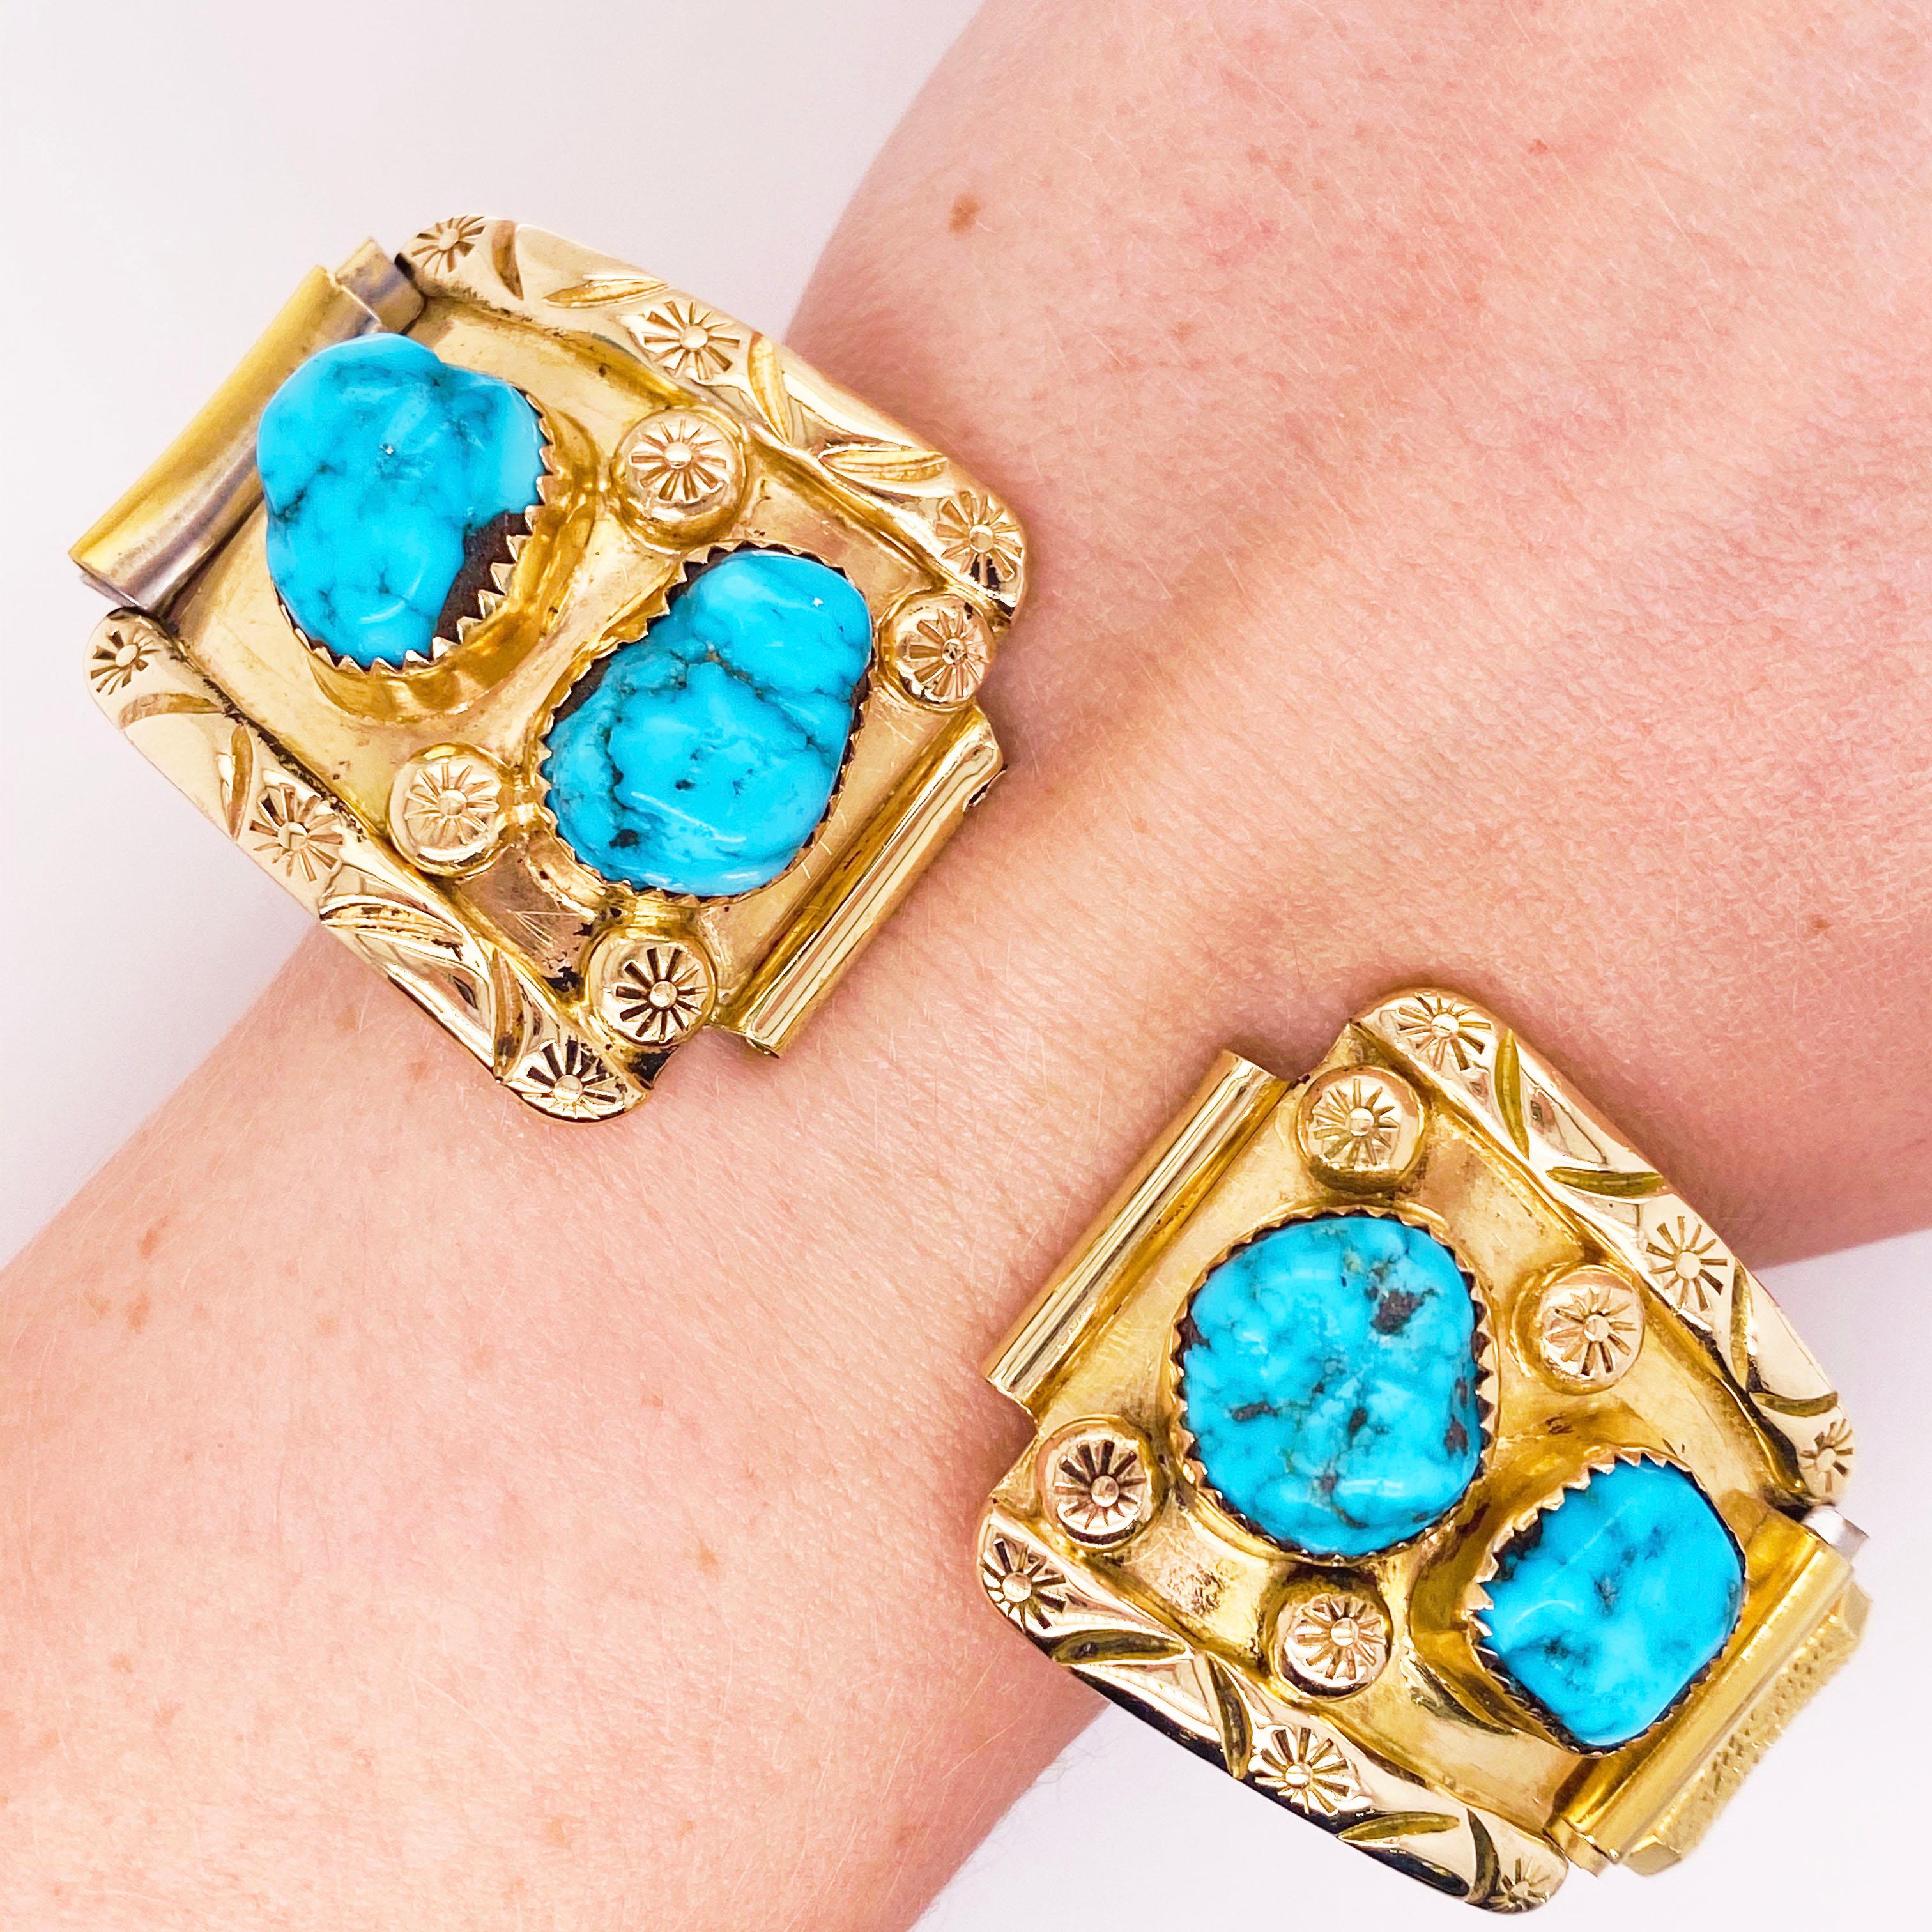 These 14 karat yellow gold watch tips featuring 4 stunning genuine turquoises are the perfect bold accessory, and would make a wonderful addition to any outfit, casual or formal. These watch tips would make the perfect gift for your loved one or